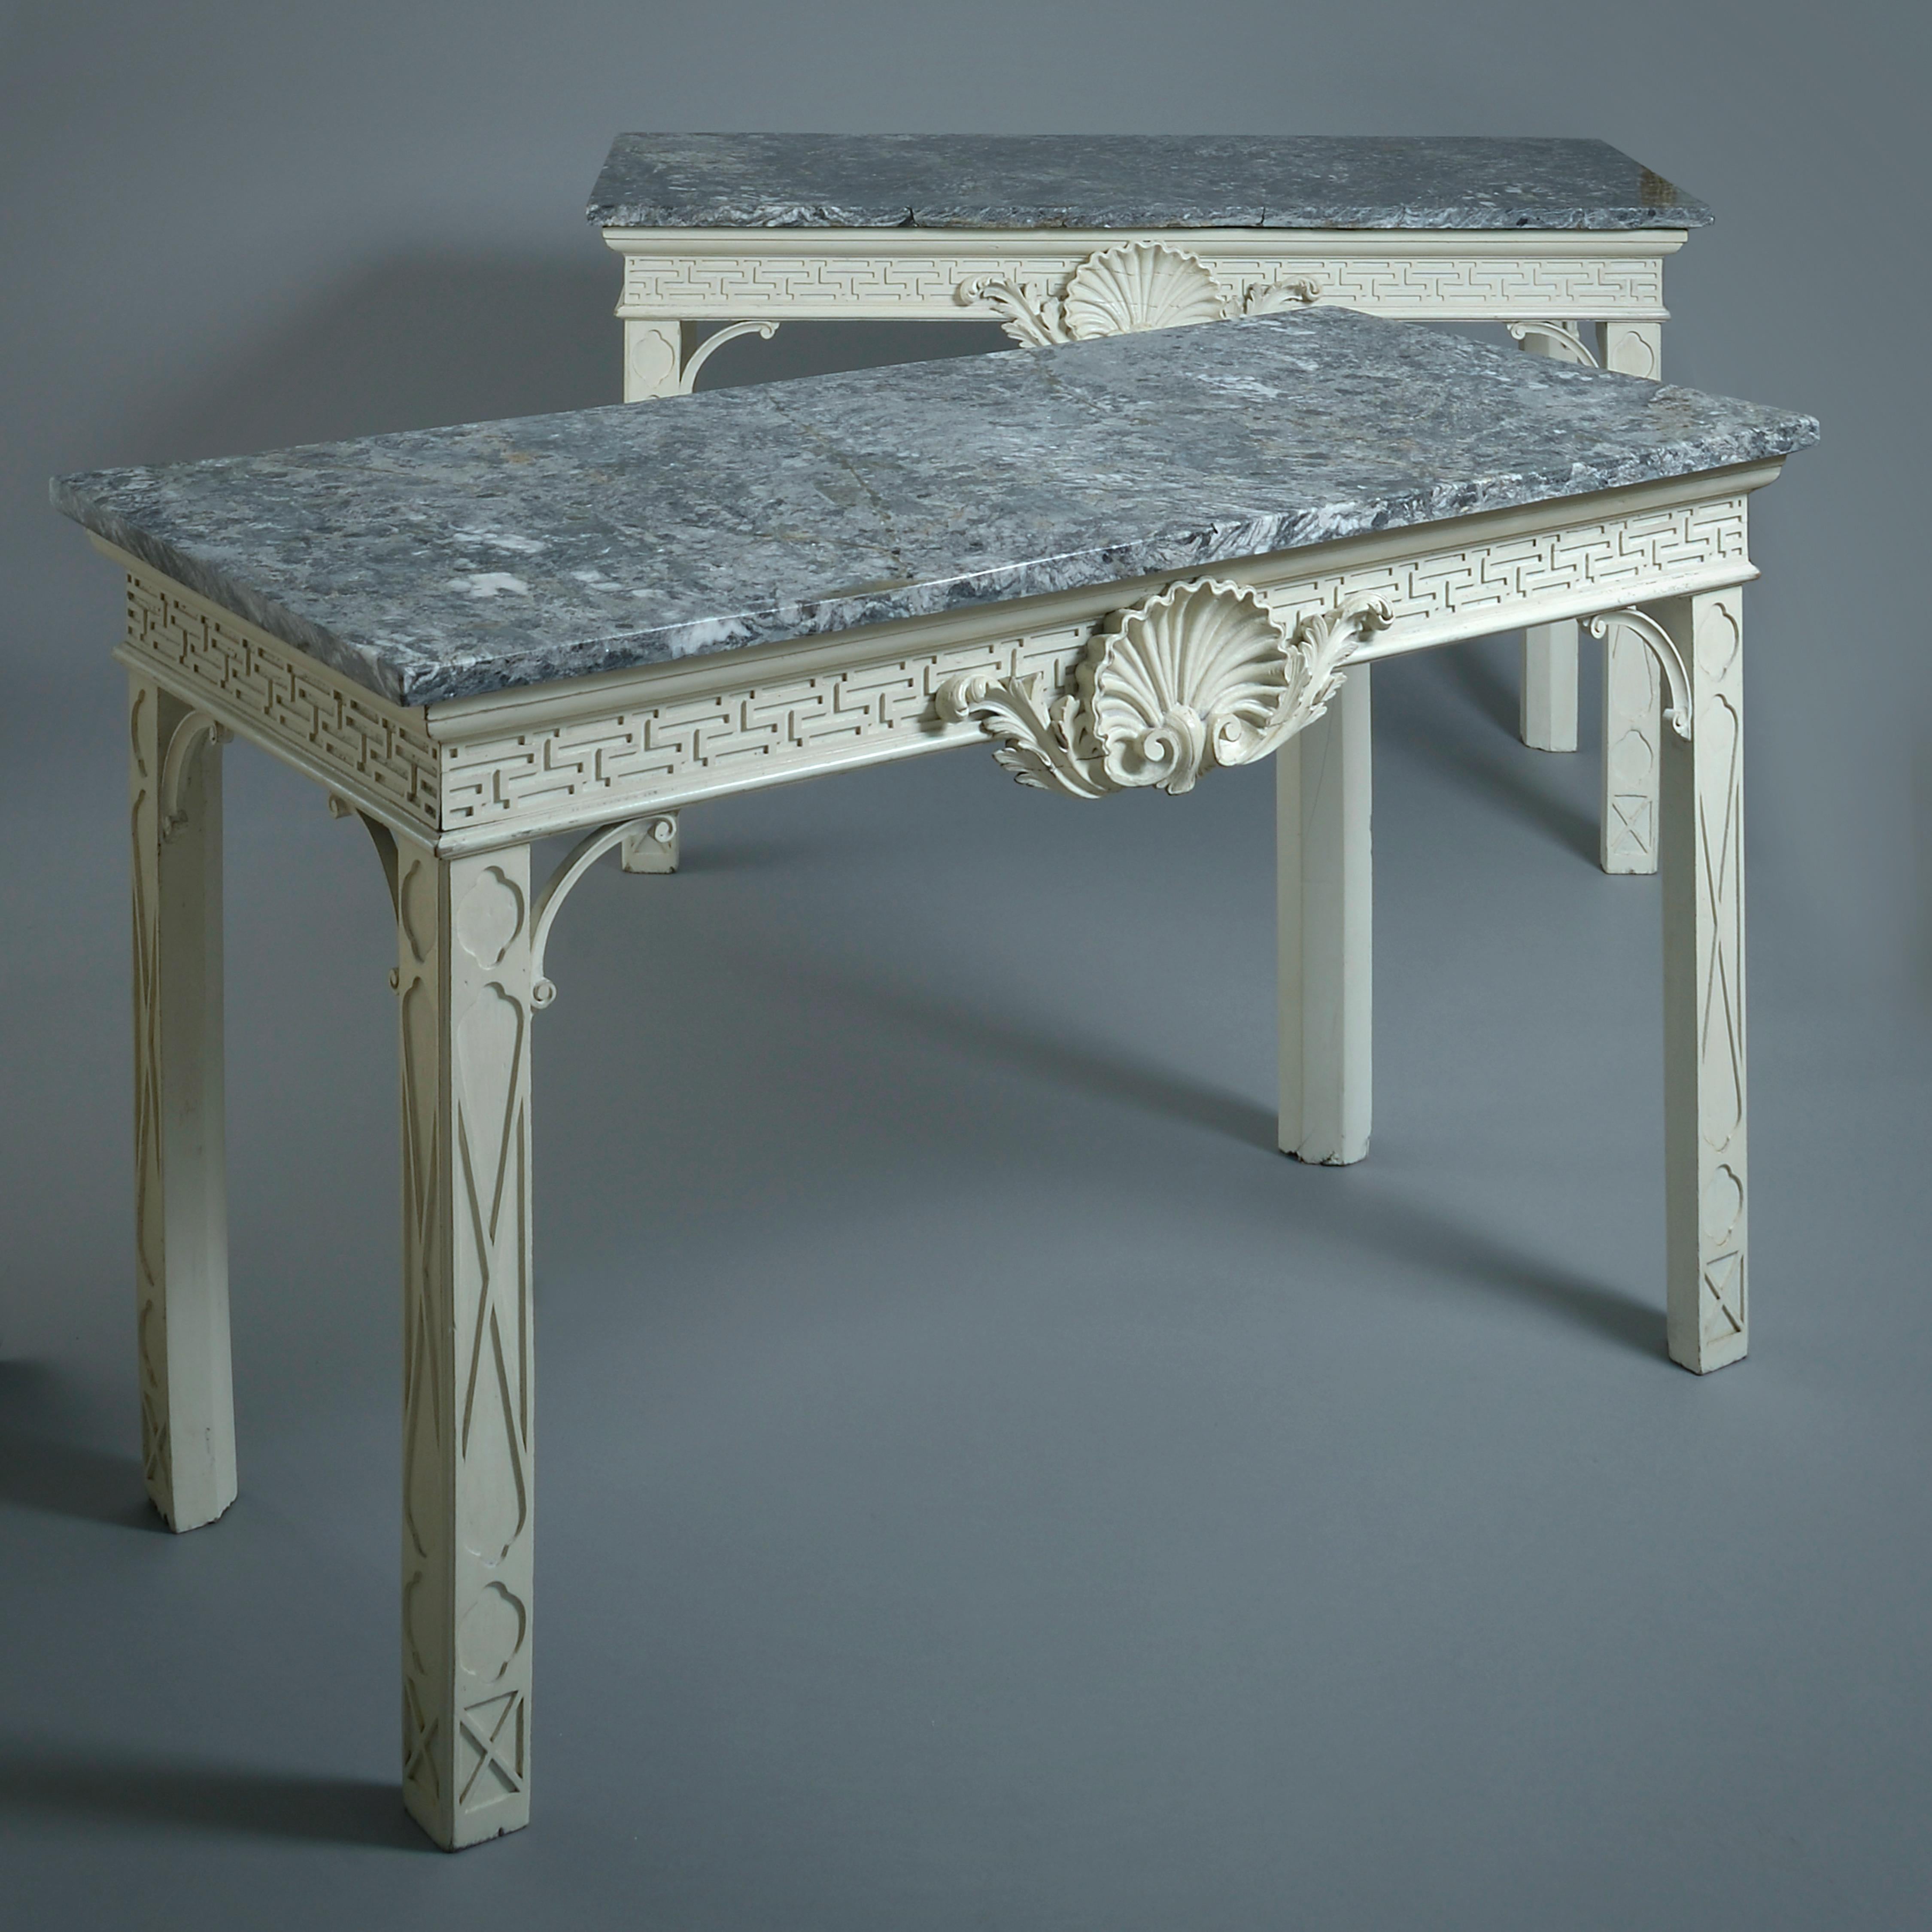 A fine pair of George II white-painted side tables, circa 1750.

Each with its original grey marble top. Redecorated following traces of original stone white paint.